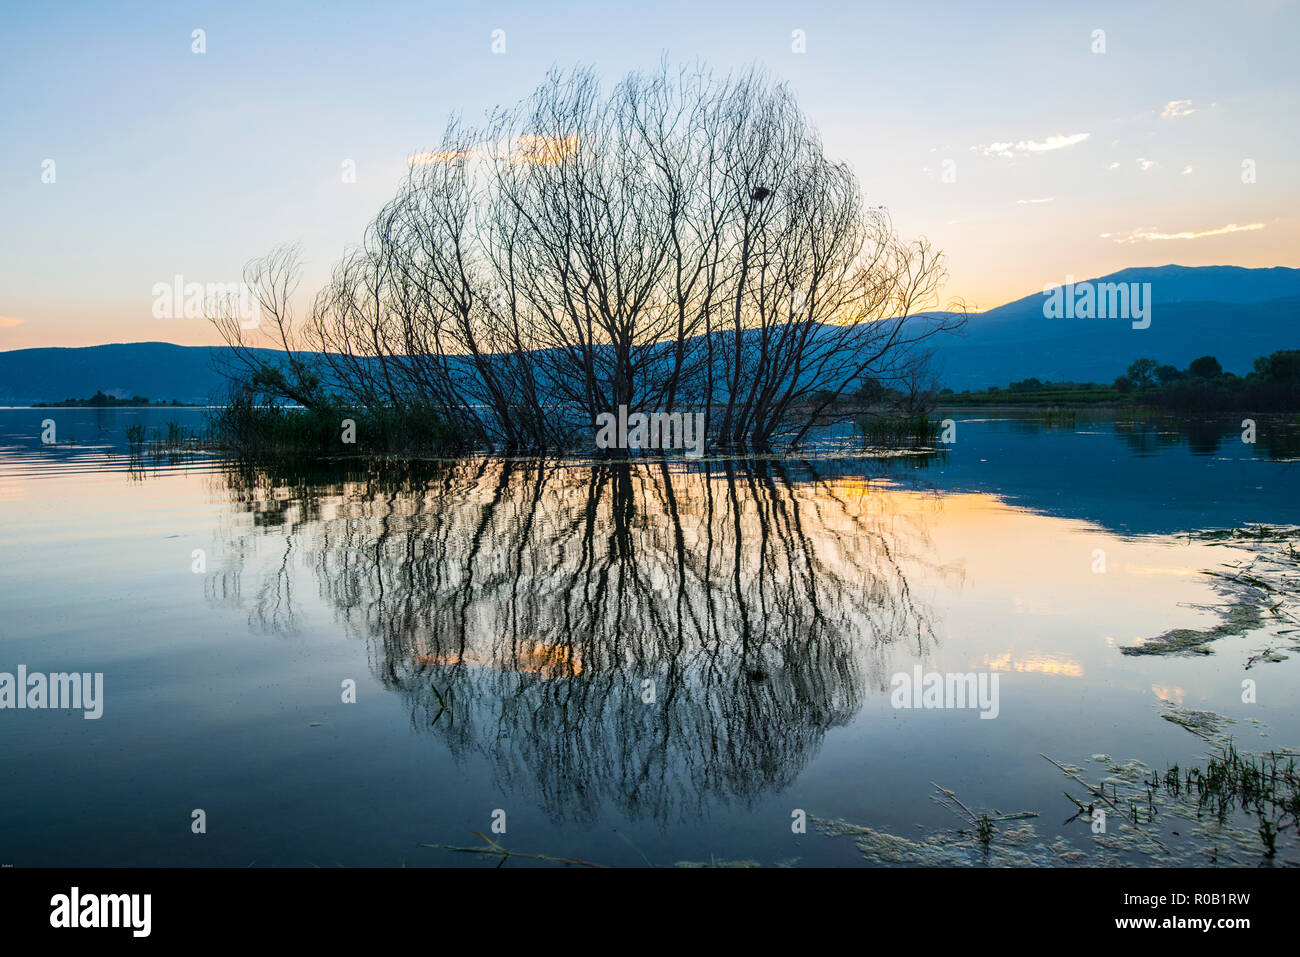 GREECE. Perfect reflection of a tree in a lake in evening light Stock Photo